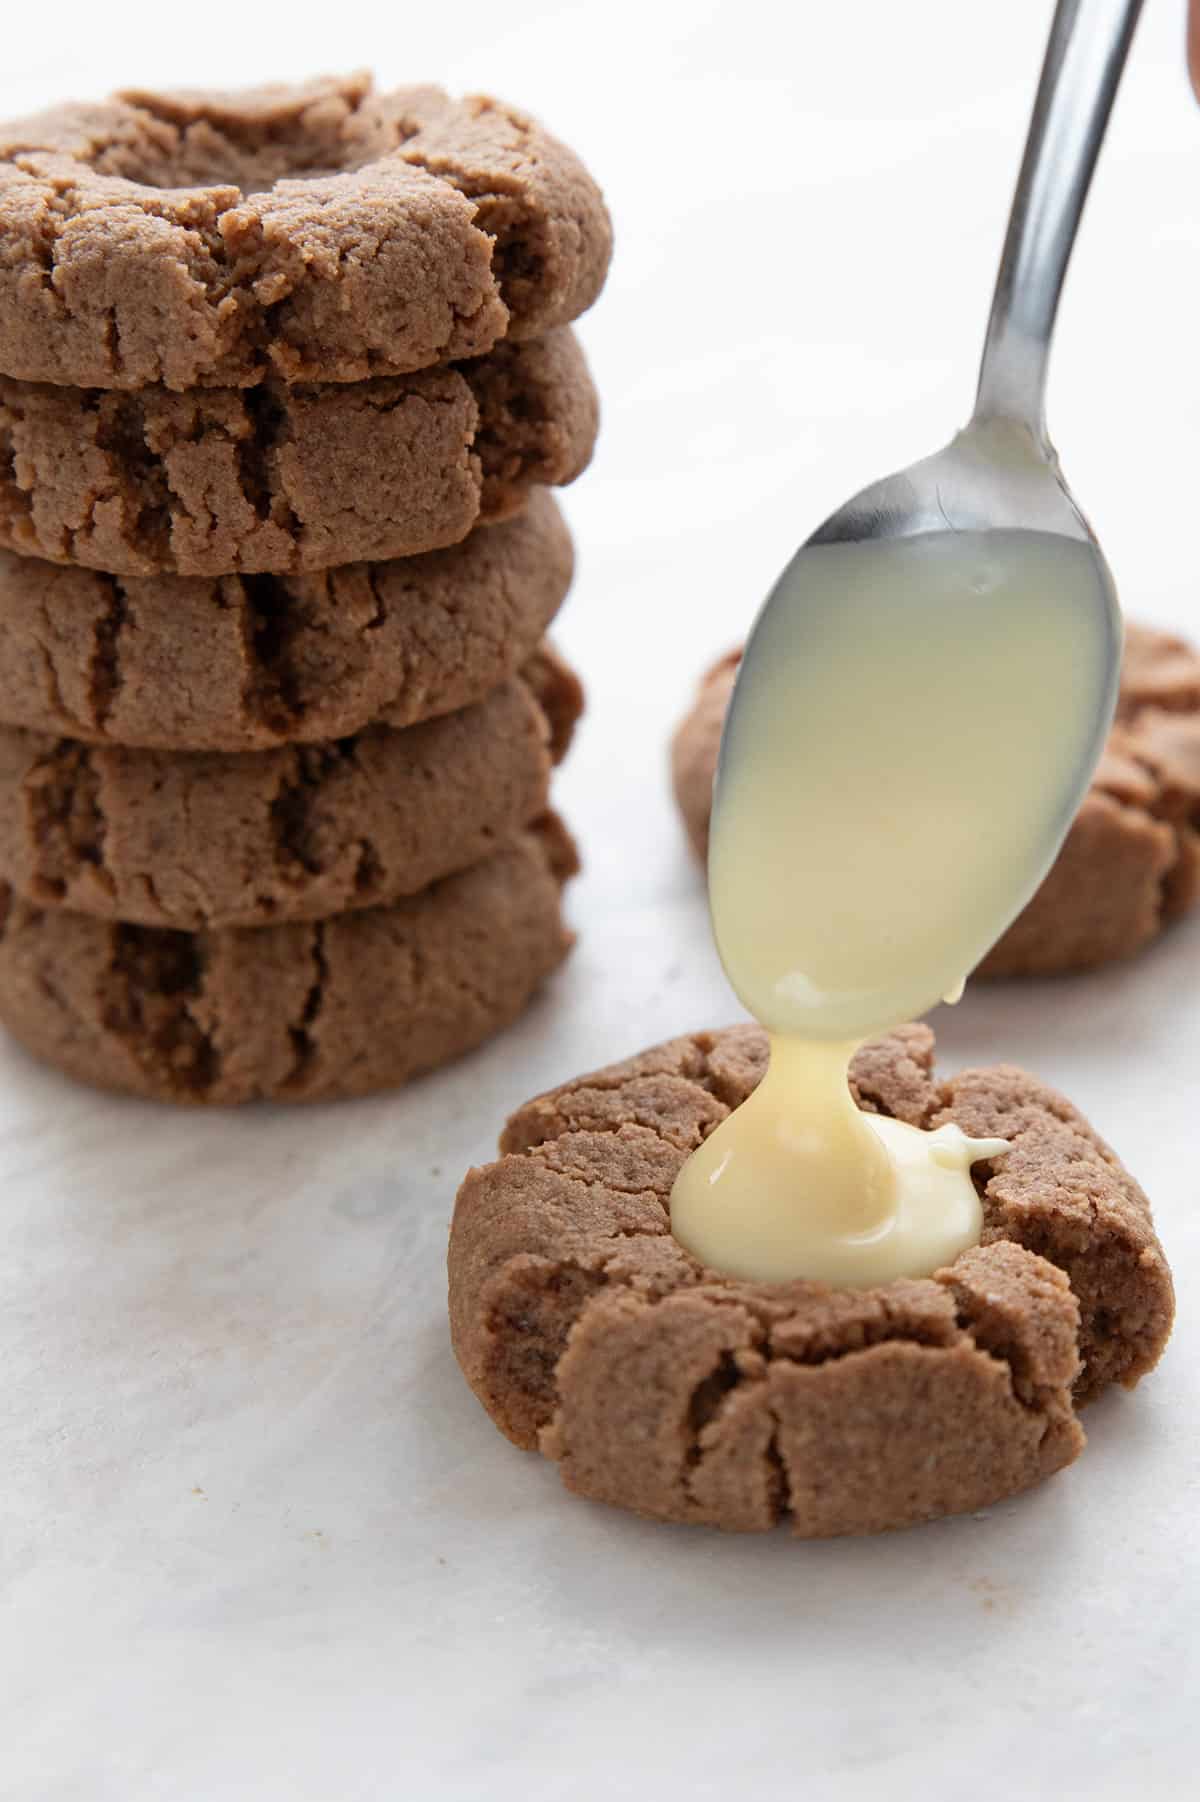 A spoon drizzling sugar free white chocolate into a gingerbread thumbprint.